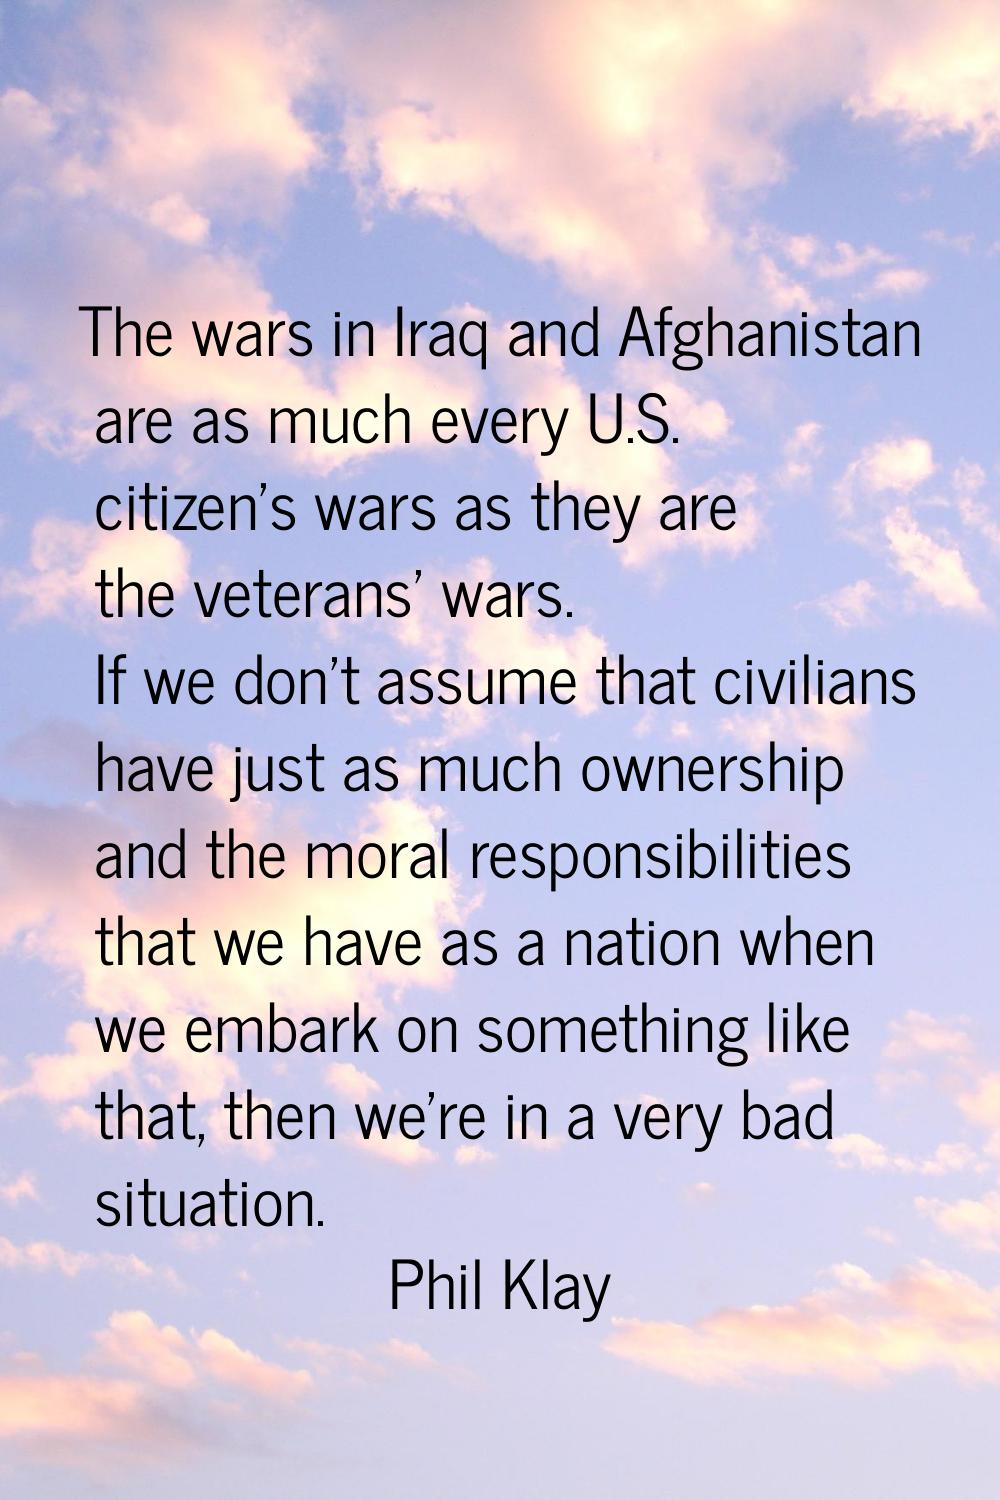 The wars in Iraq and Afghanistan are as much every U.S. citizen's wars as they are the veterans' wa